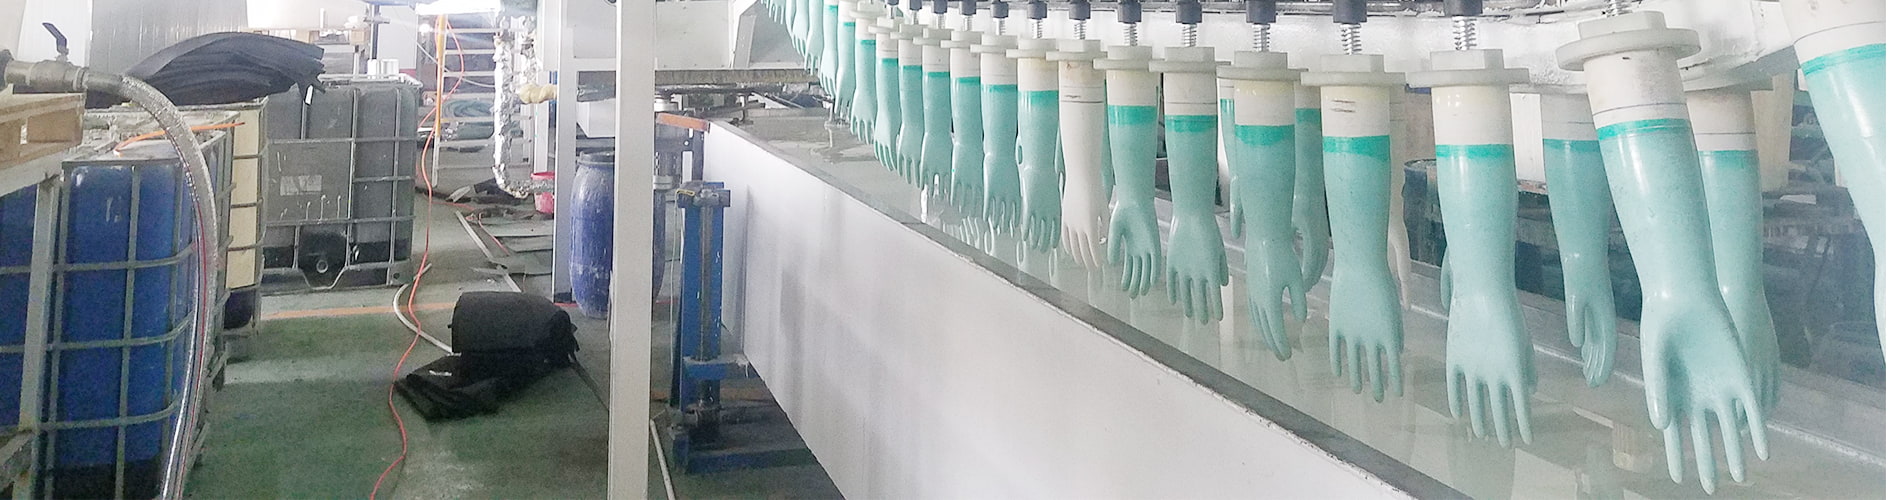 Industrial Glove Production Line